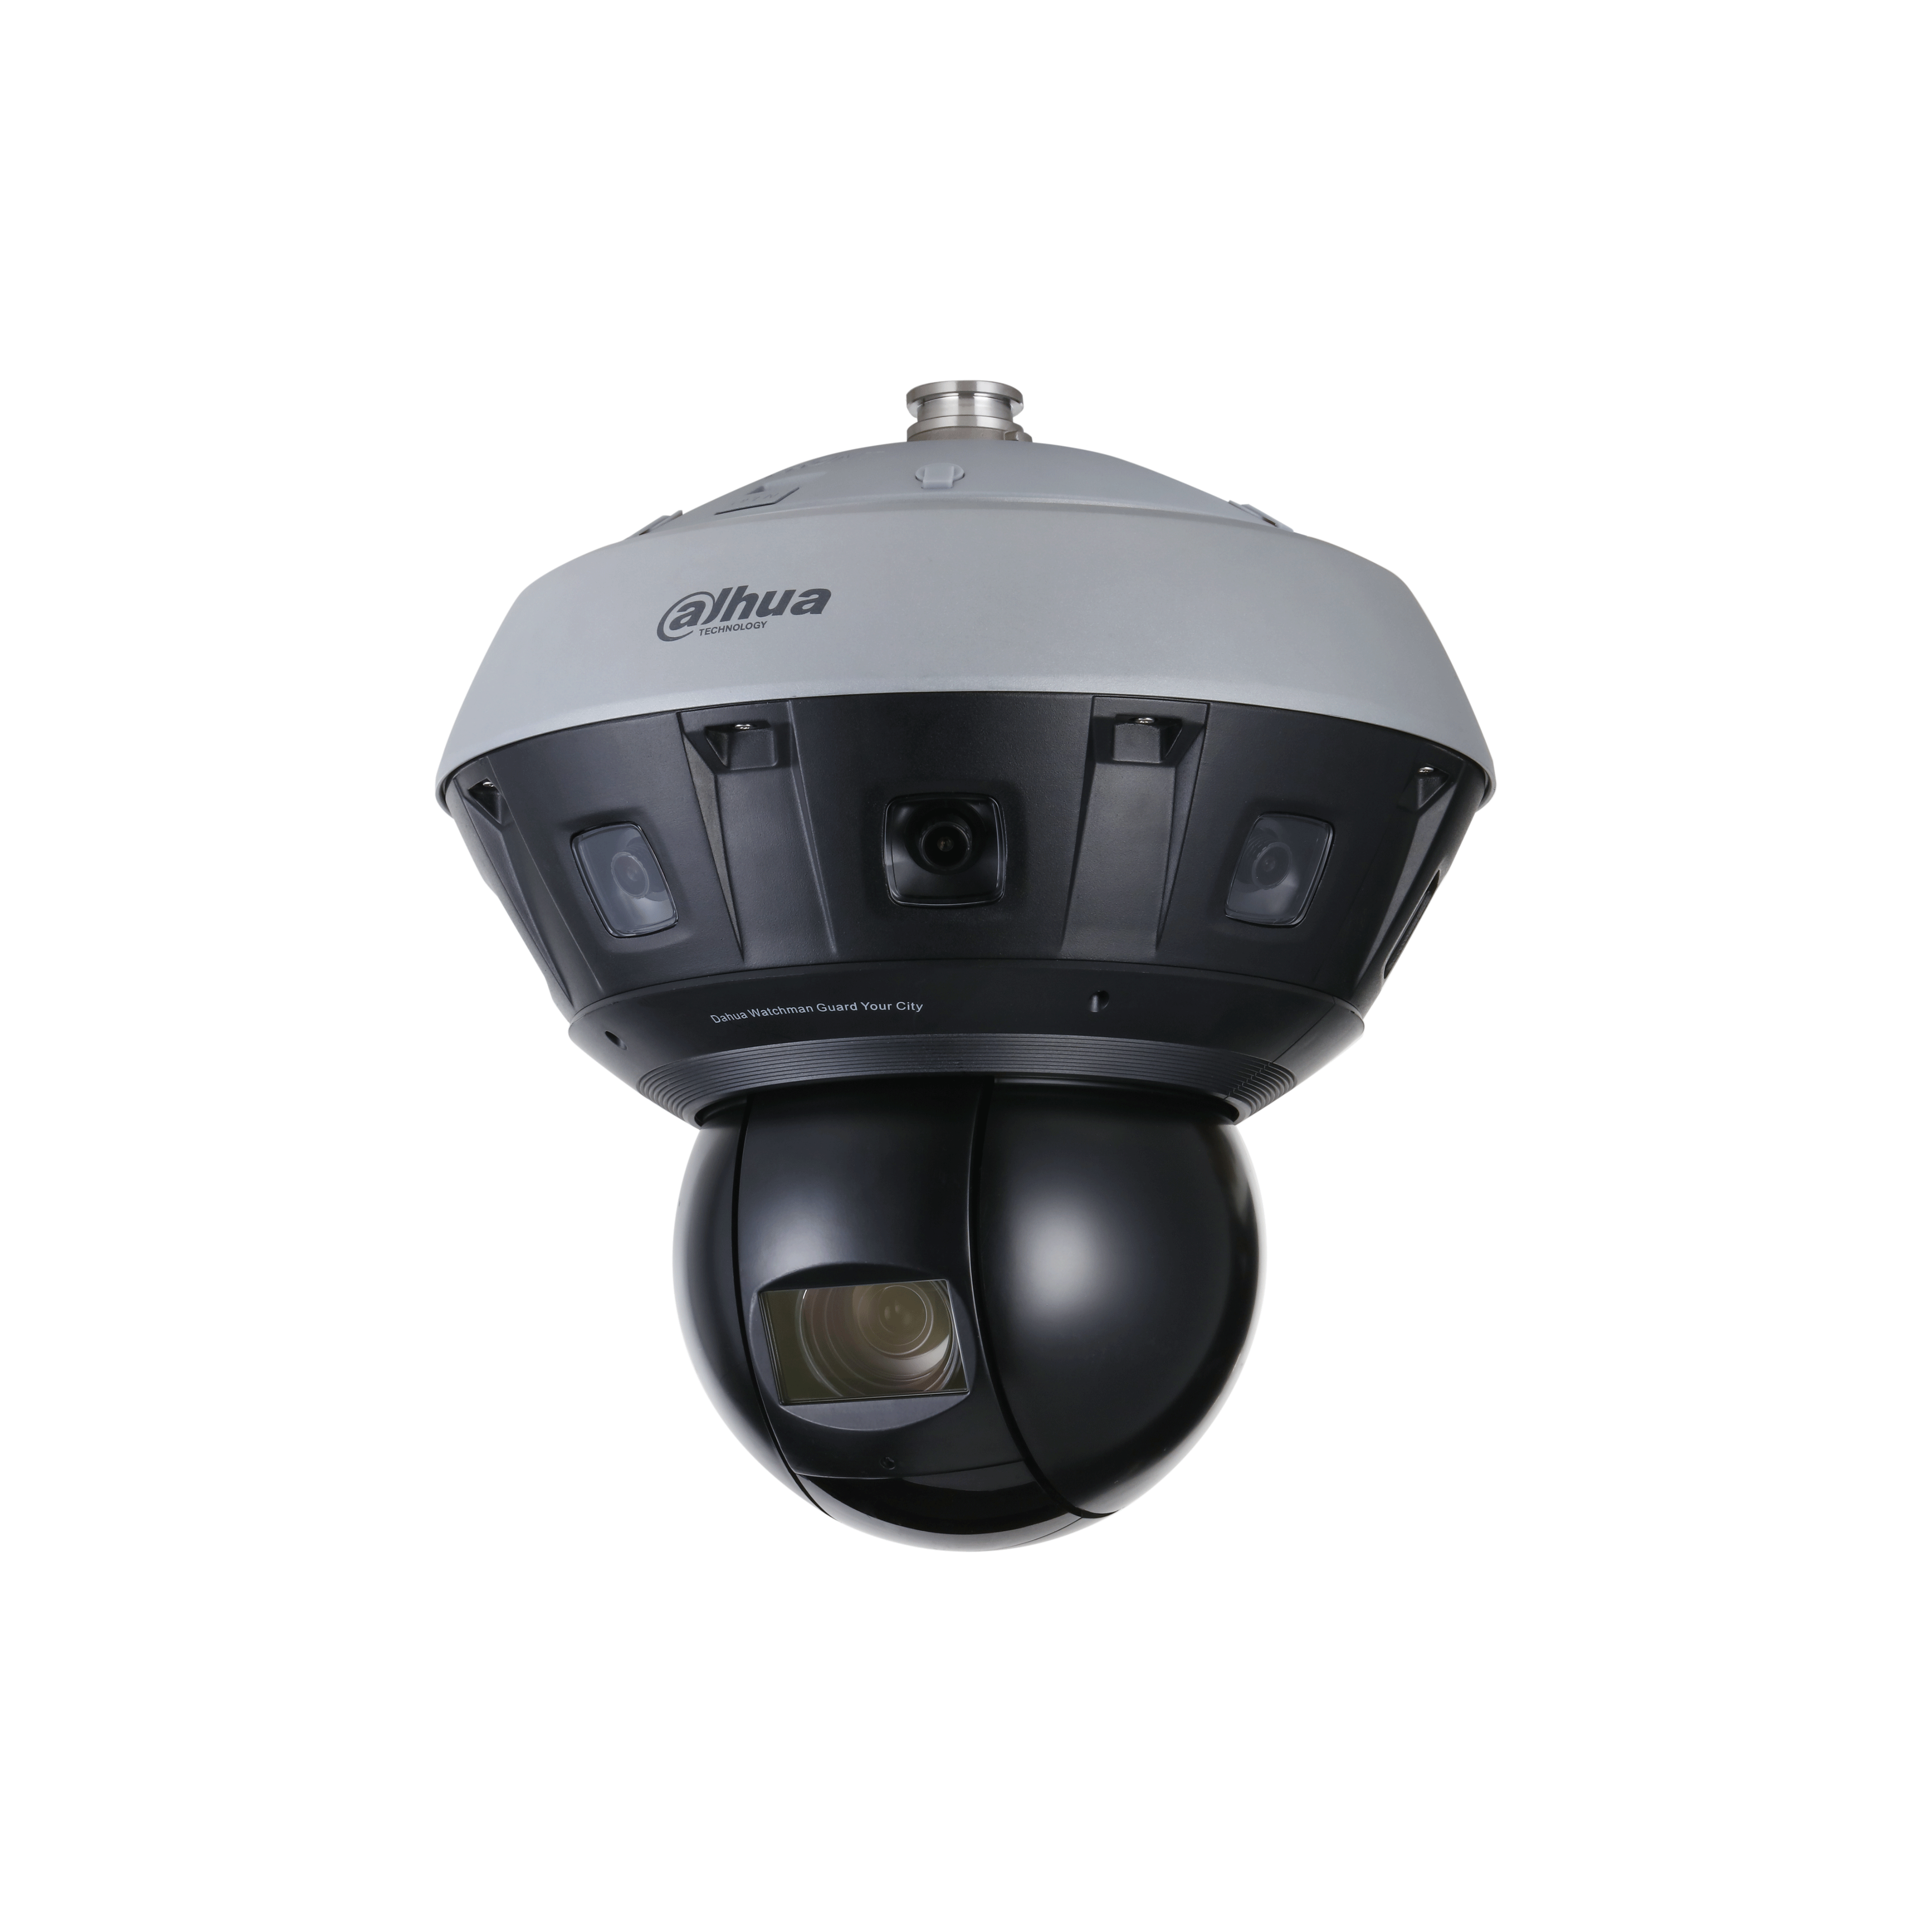 WIZMIND SERIES IP CAMERA BLACK AI 180° PANORAMIC AUTO TRACKING 5x4MP H.264/4+/5/5+ DUAL LENS PTZ 120 WDR PLASTIC/METAL 2.8&5.5-220MMFIXED & MOTORISED LENS 40X ZOOM IR 400M IP66 WITHOUT MIC AUDIO IN AUDIO OUT 7 x ALARM IN 3 x ALARM OUT SUPPORT UP TO 512GB SD 36VDC